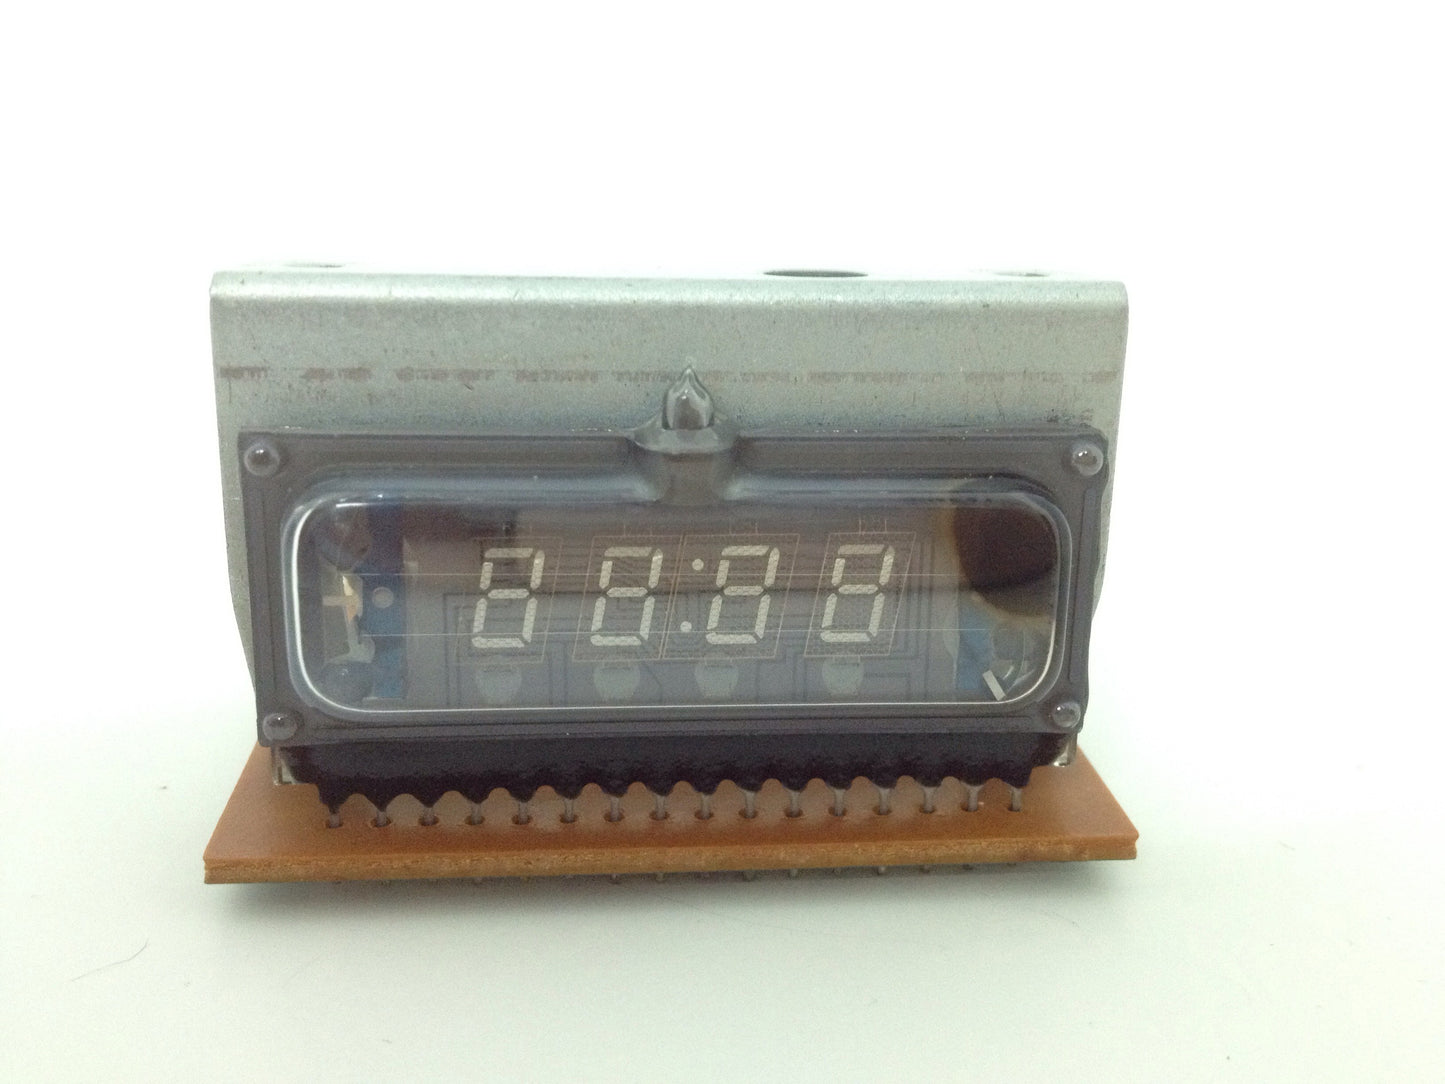 Tascam 112 tape counter display